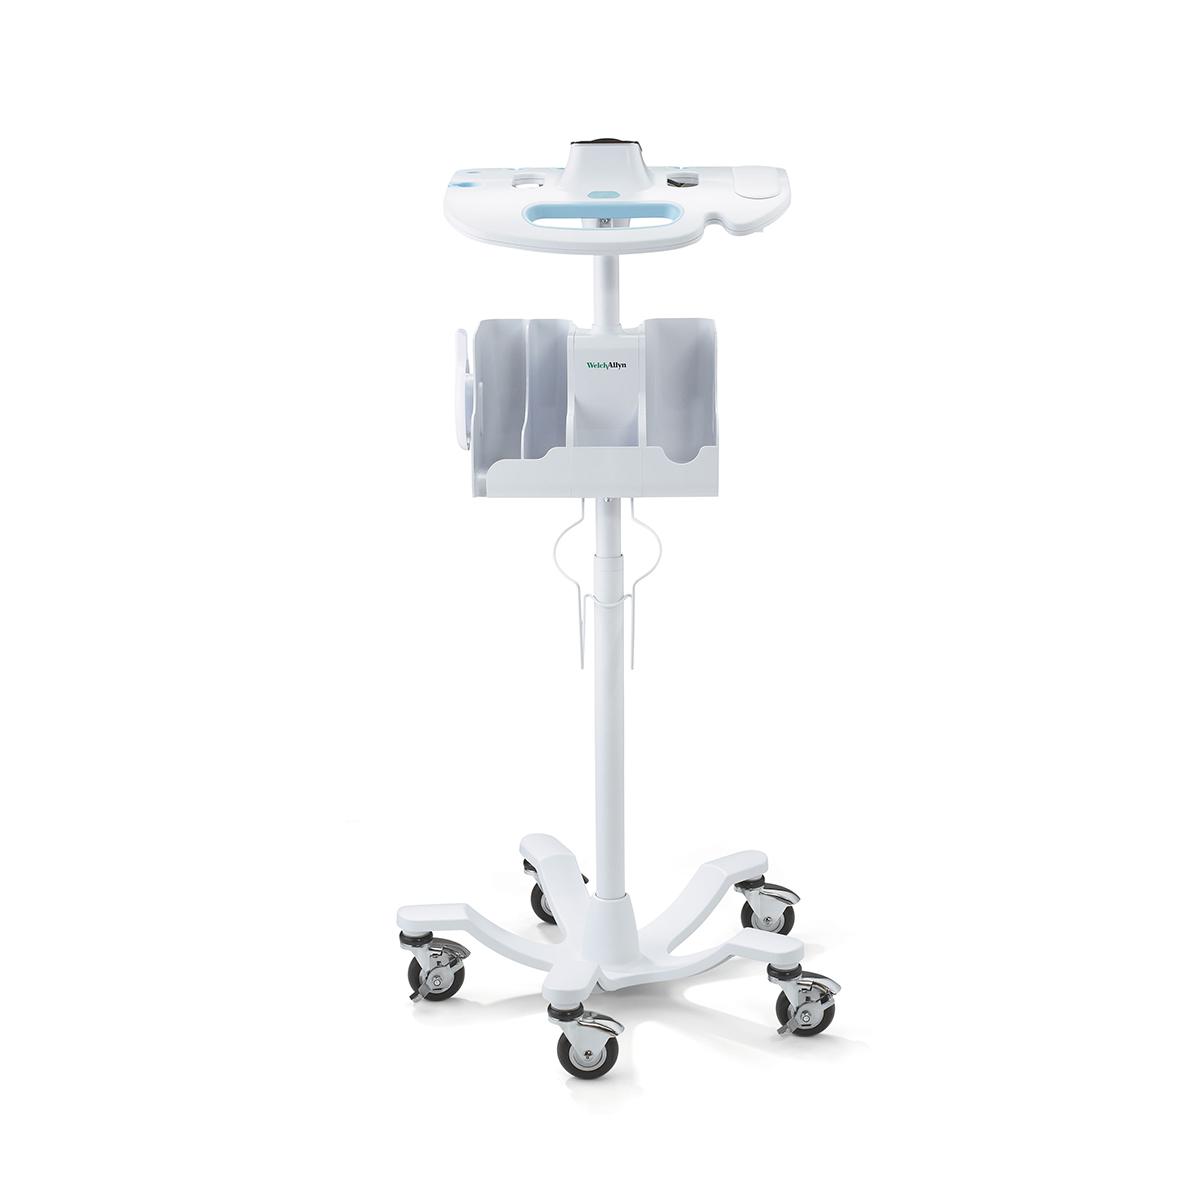 Welch Allyn Connex 6800 Series Wireless Vital Signs Monitor with Nellcor SpO2 and SureTemp Plus